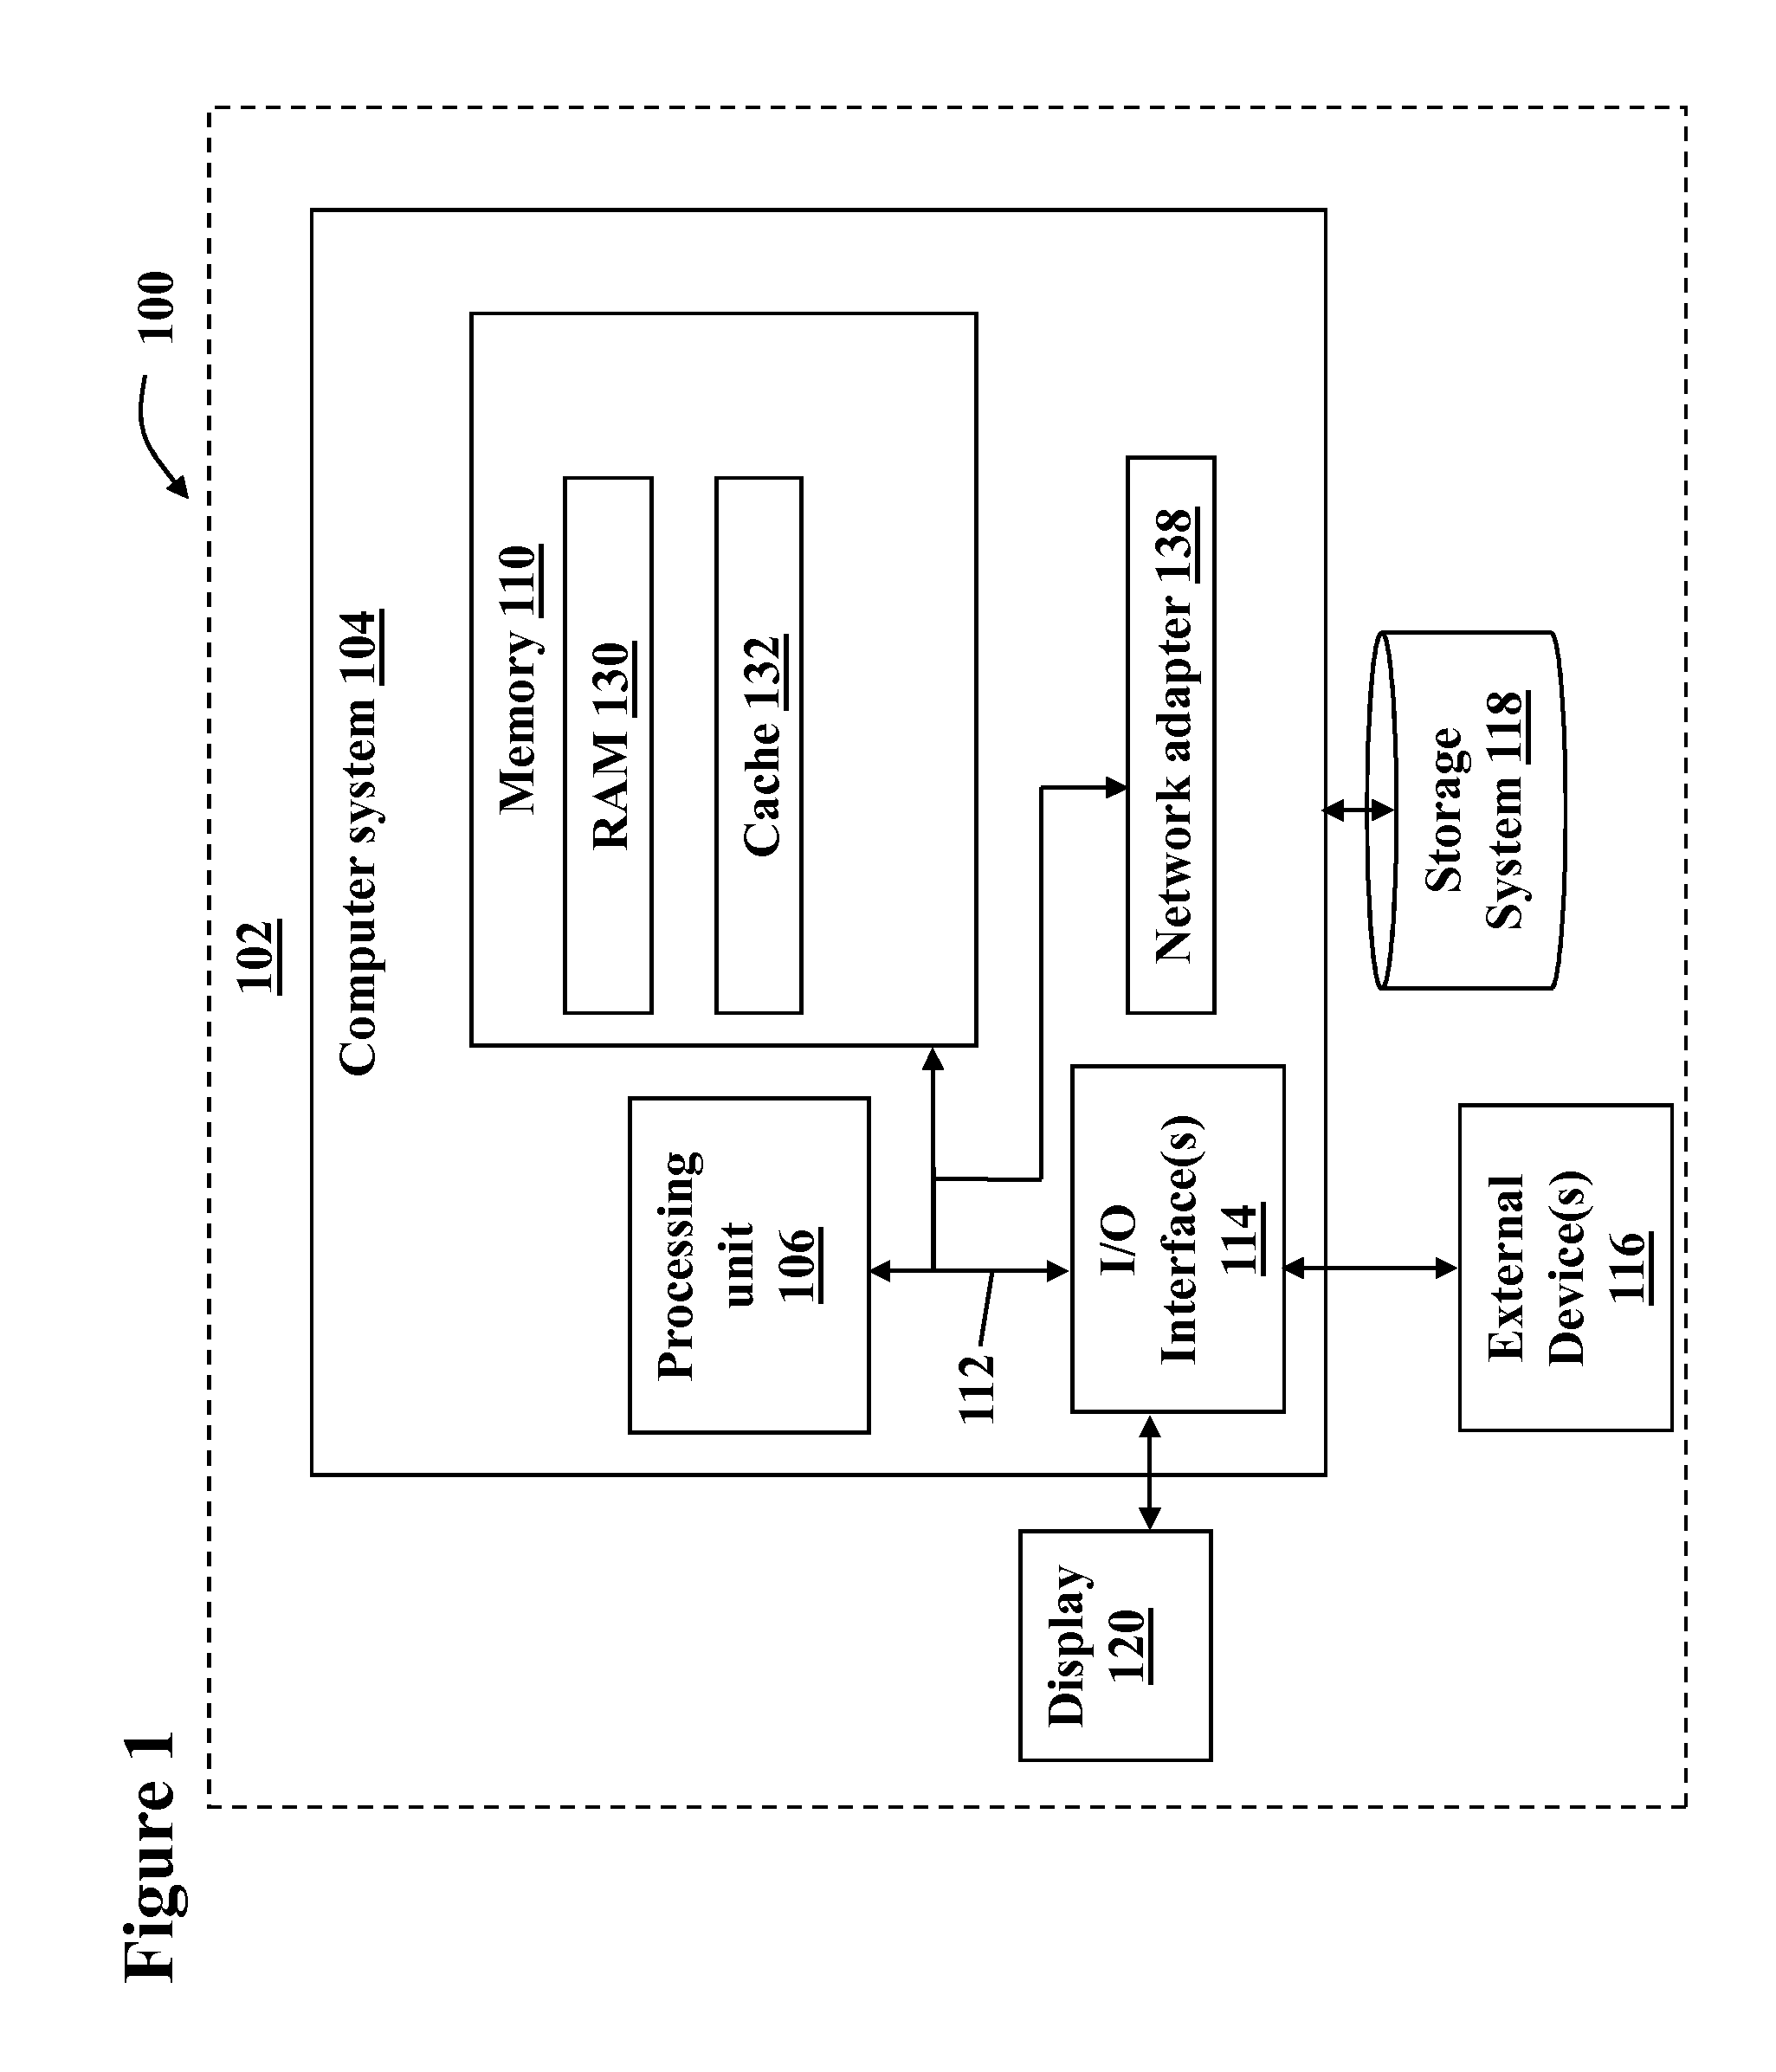 Model-driven data archival system having automated components